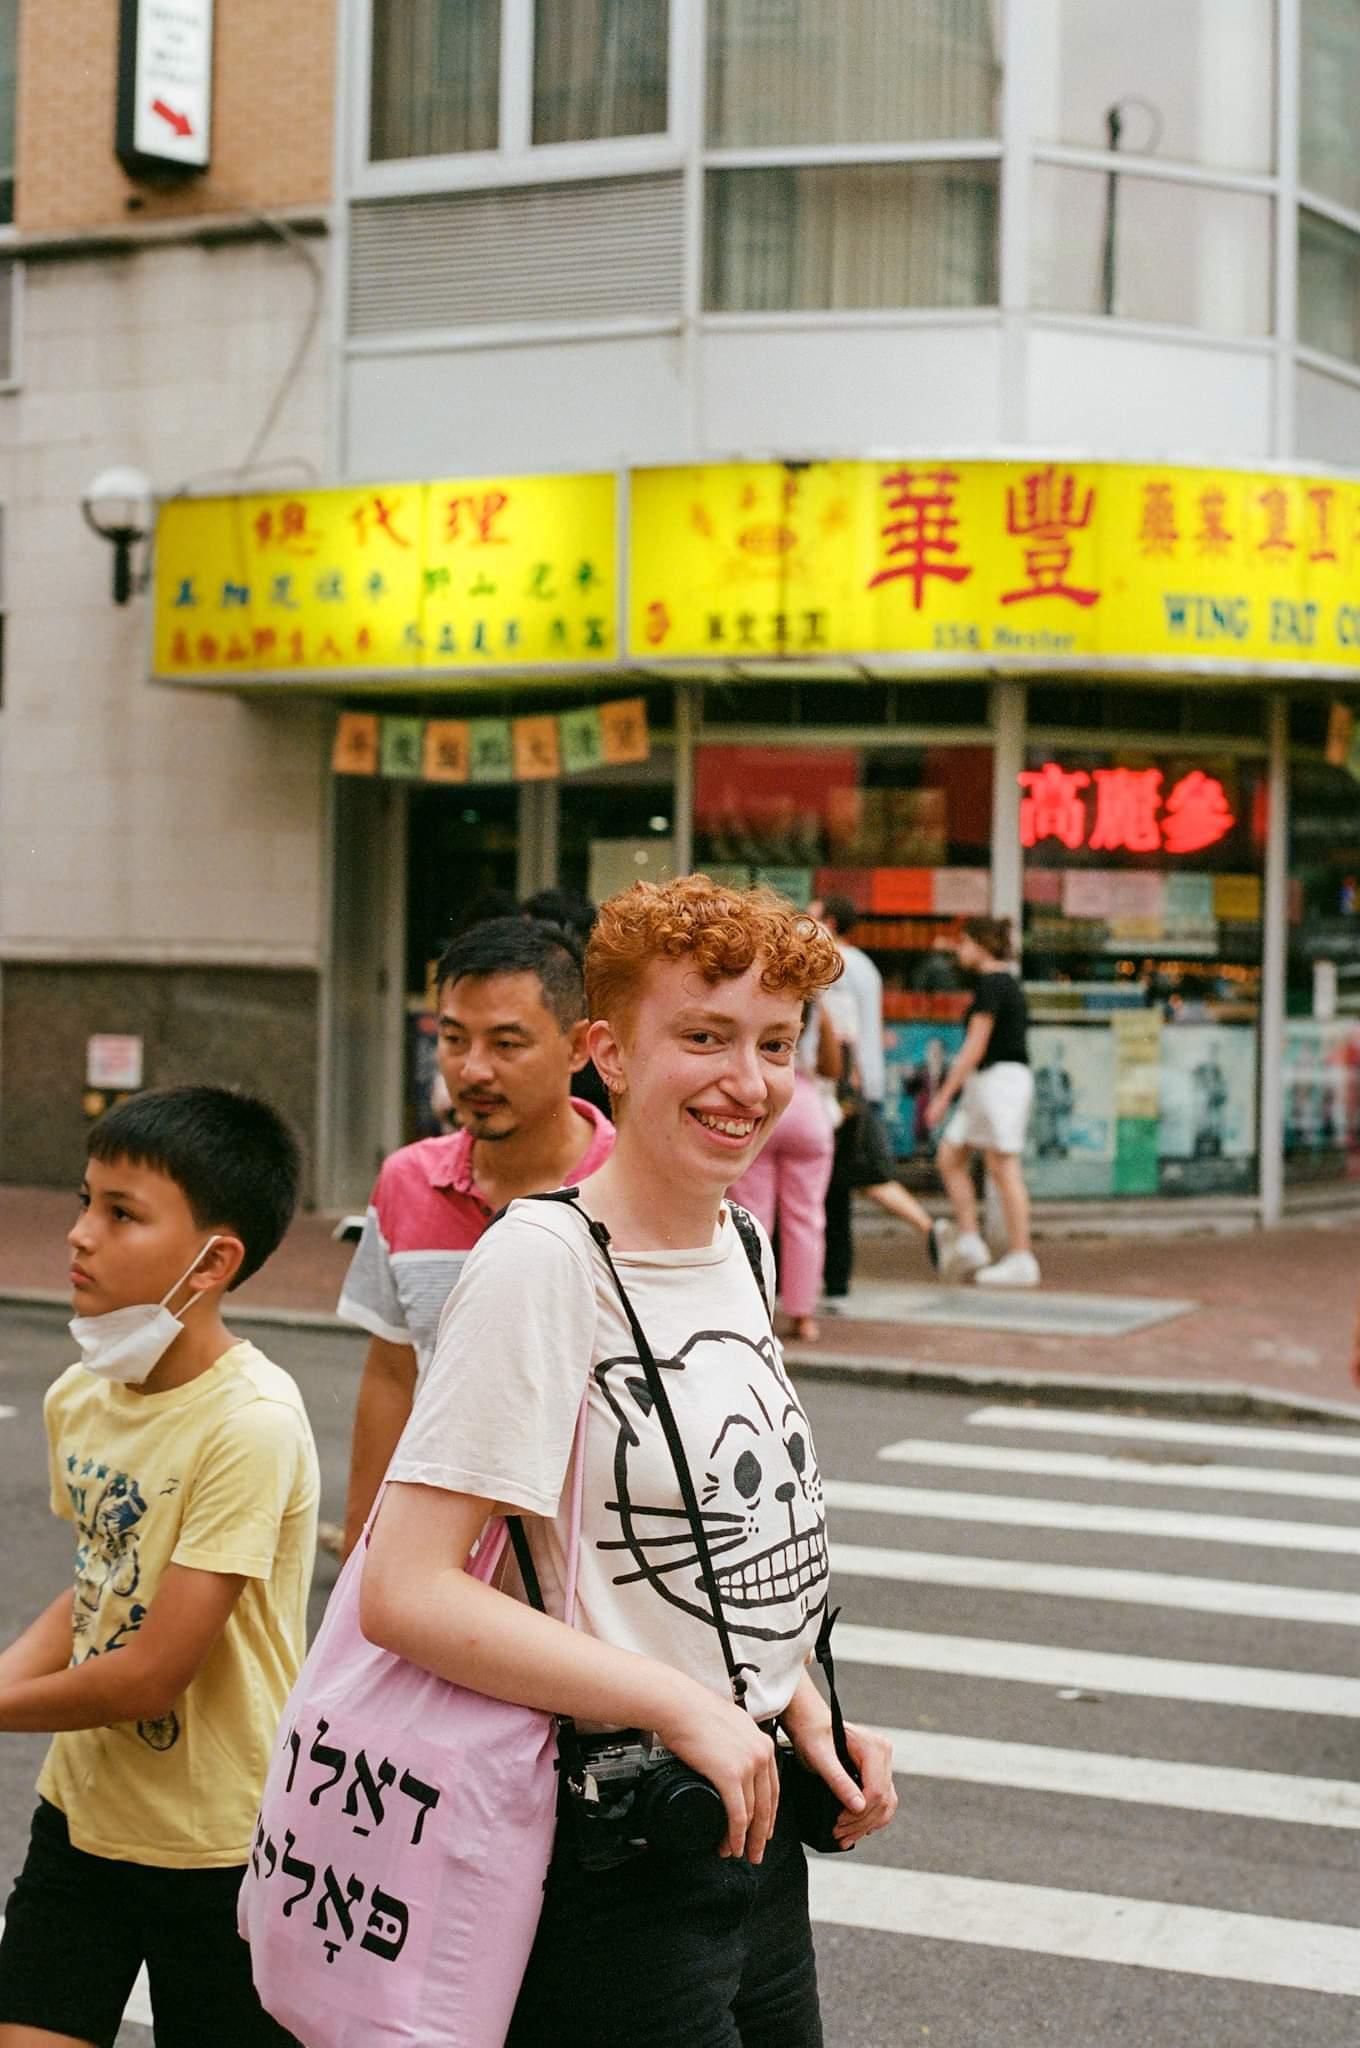 a film photograph of Storm, a white person with short ginger hair, smiling in front of a chinatown shopfront, holding 2 cameras. phot by Daniel Velez @djvelezc.